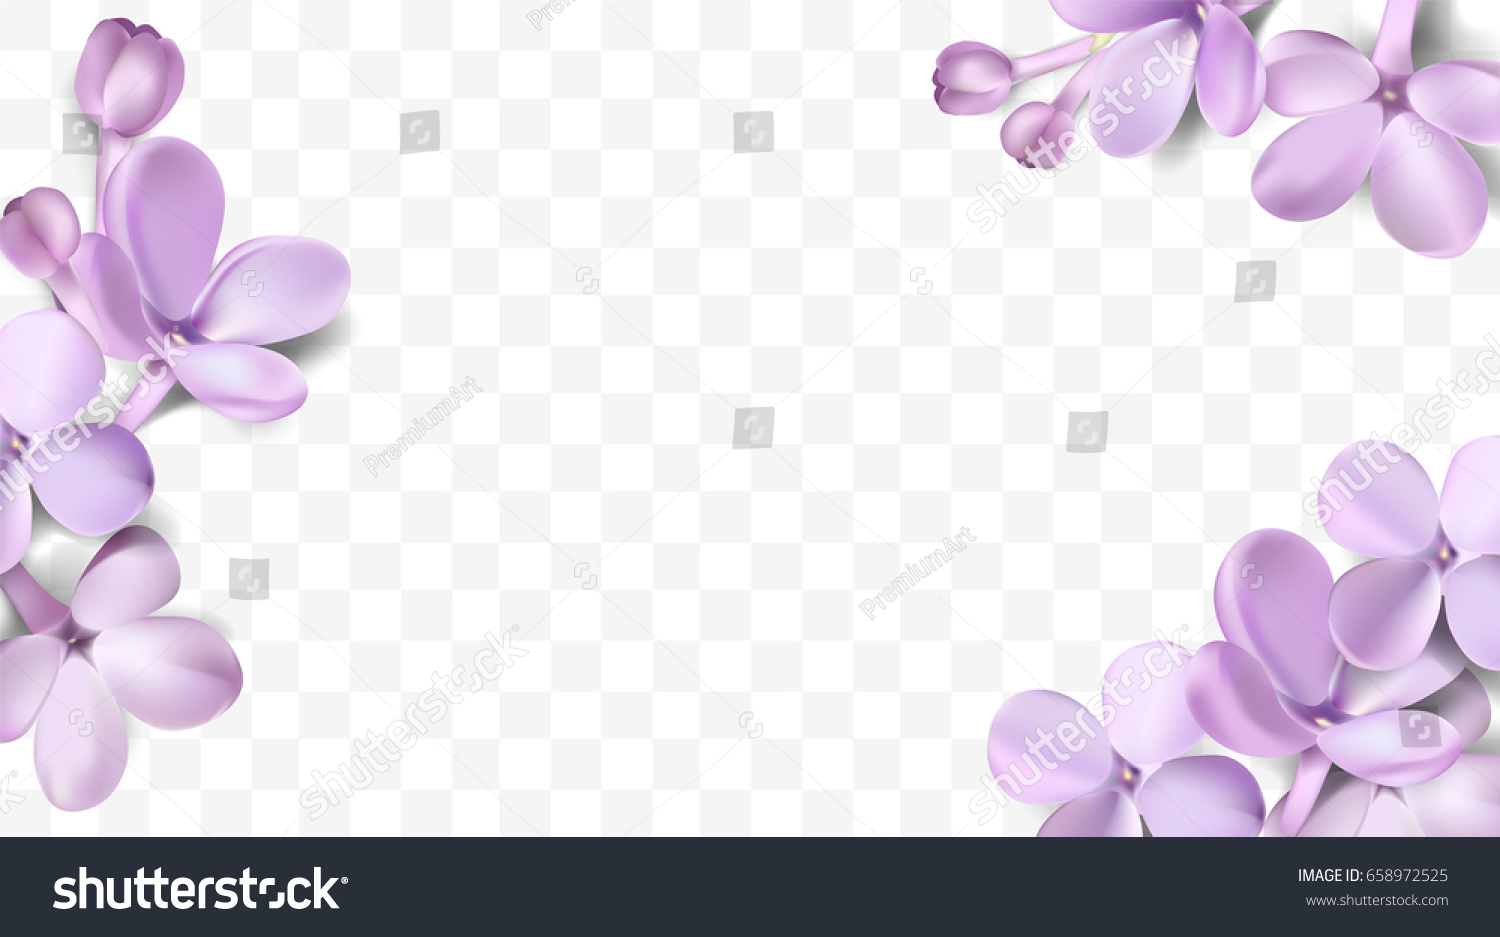 SVG of Soft pastel color floral 3d illustration on violet background. Purple Lilac flowers and petals watercolor style vector illustration template with place for text svg